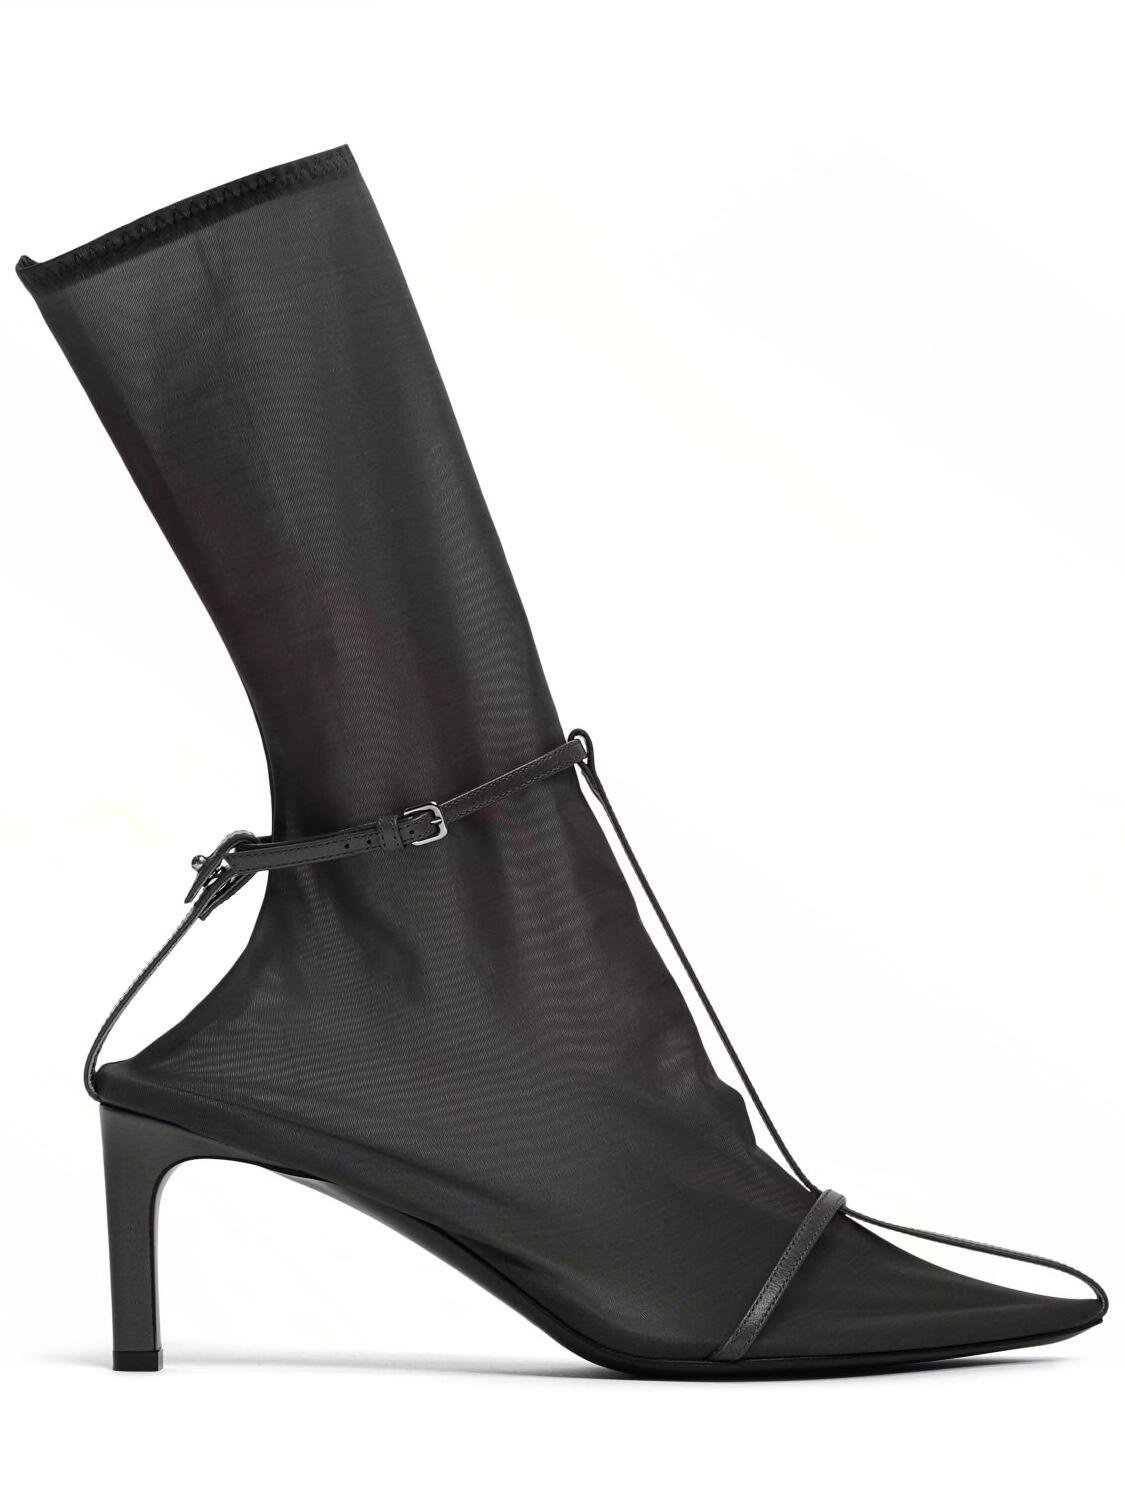 65mm Mesh & Leather Ankle Boots by JIL SANDER